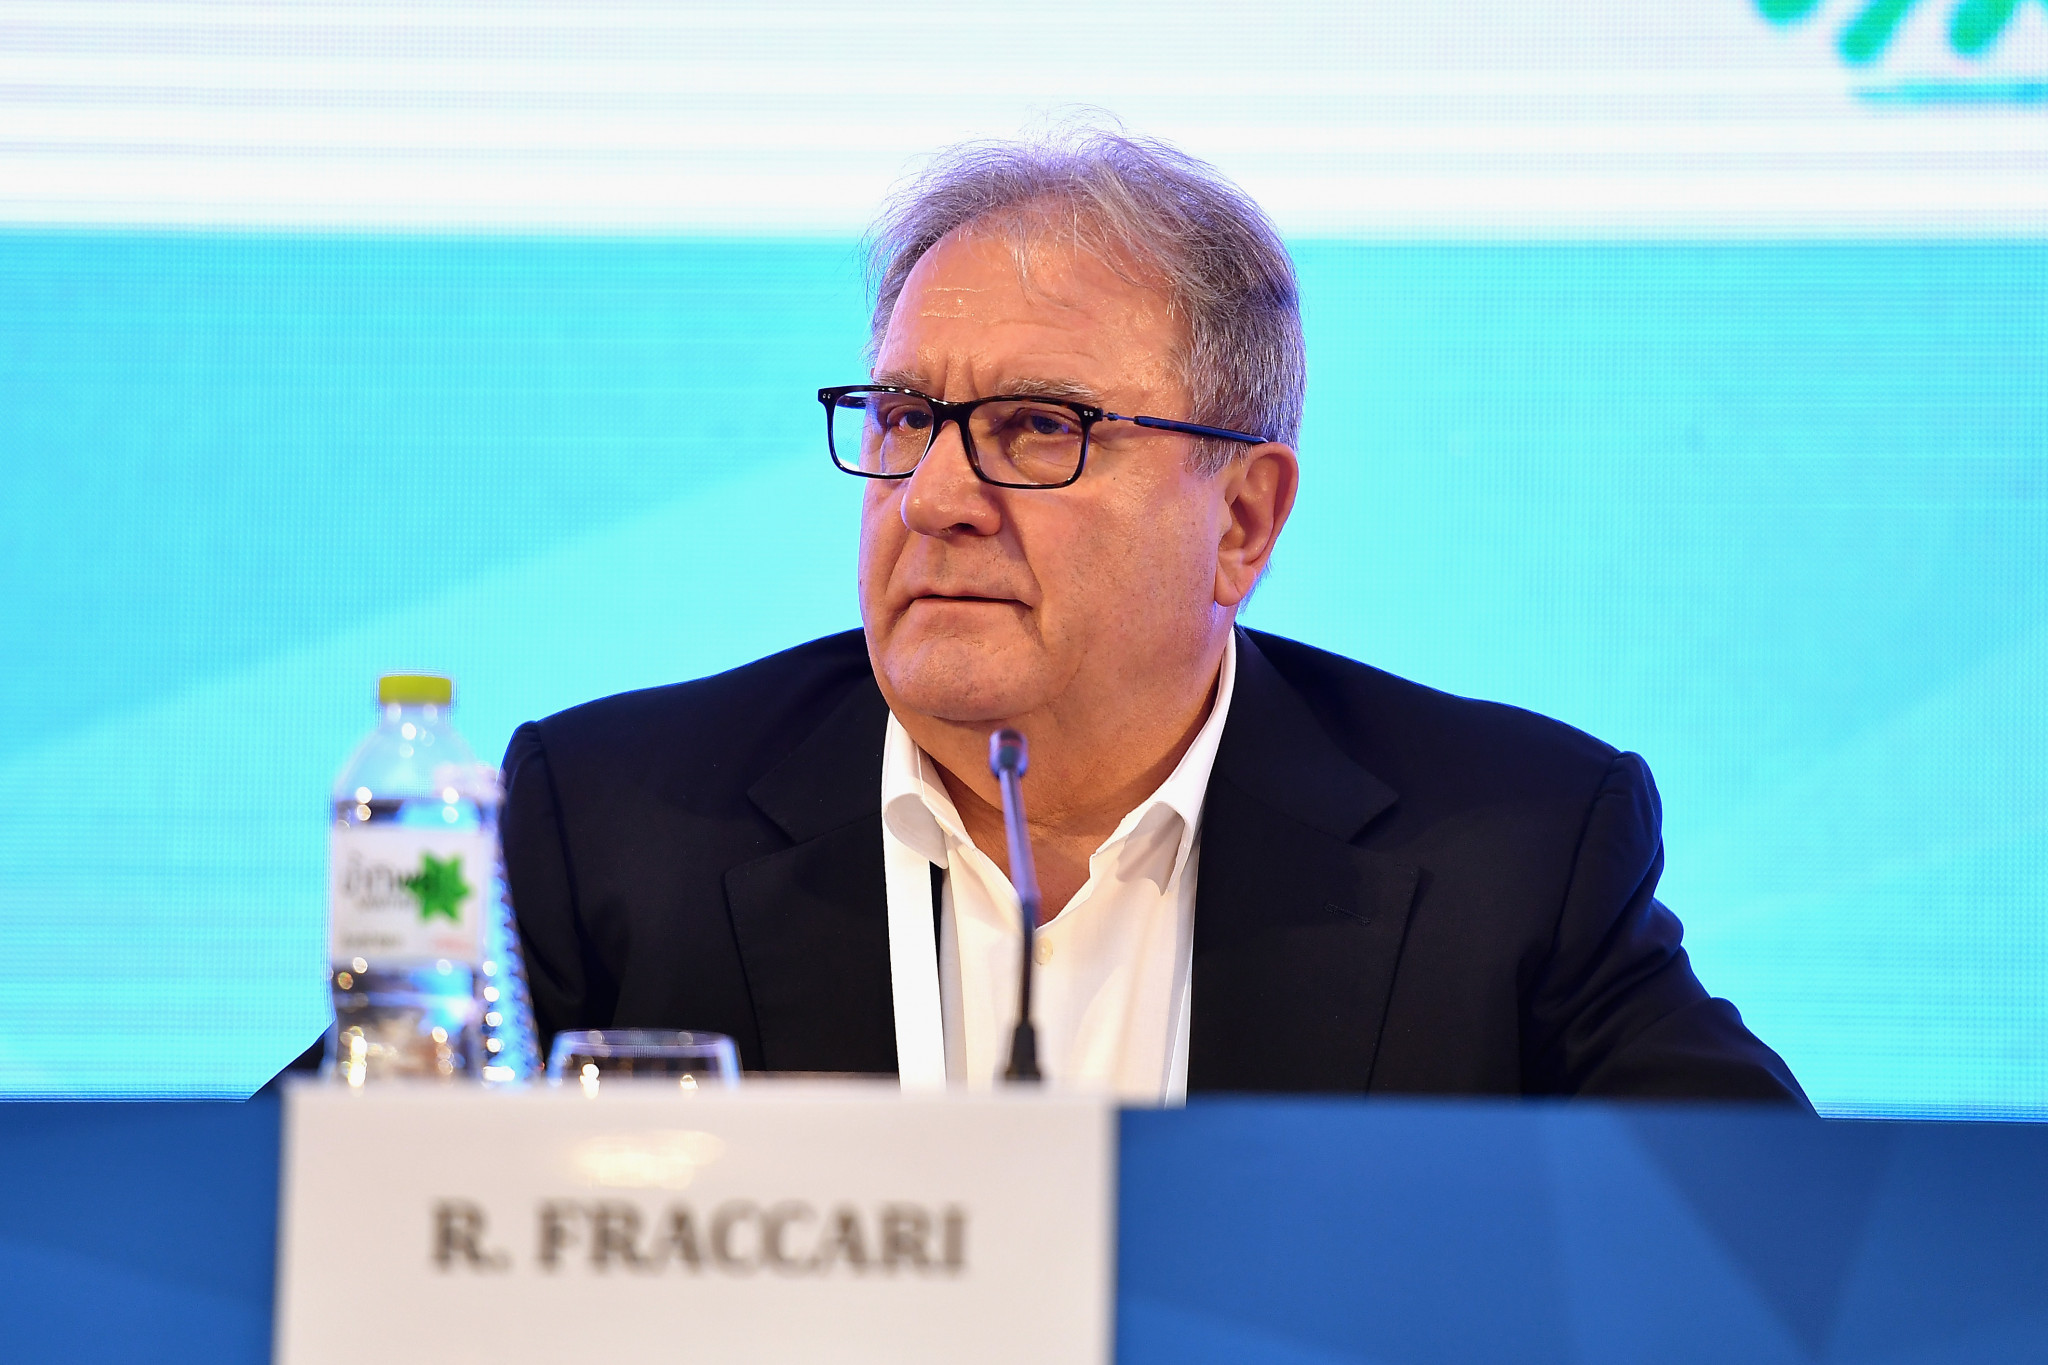 Riccardo Fraccari was appointed as secretary general of the Association of IOC Recognised International Sports Federations (ARISF) ©Getty Images